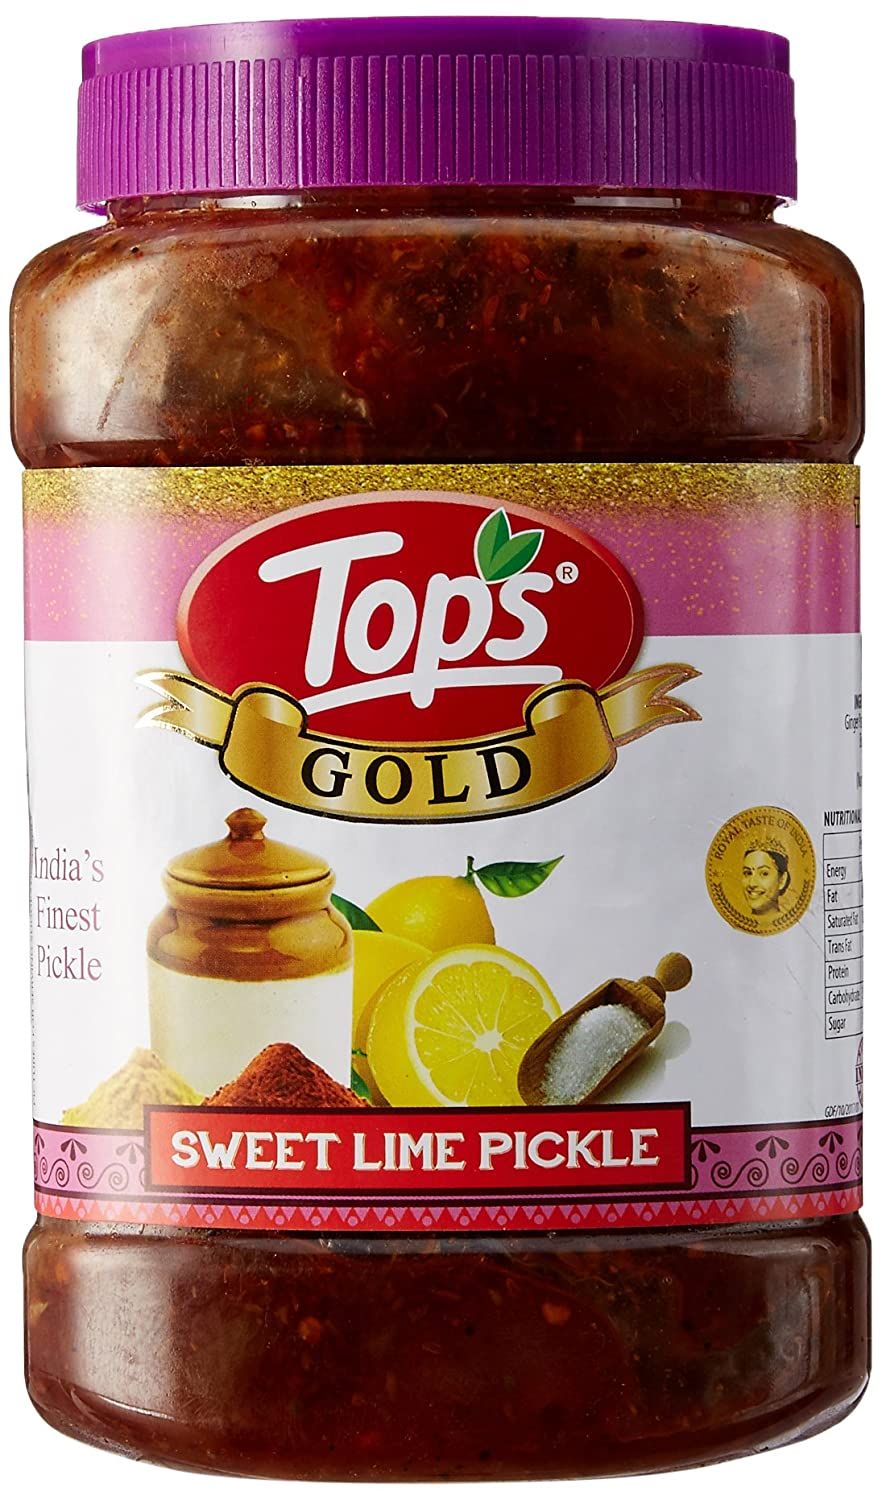 Tops Gold Sweet Lime Pickle Image